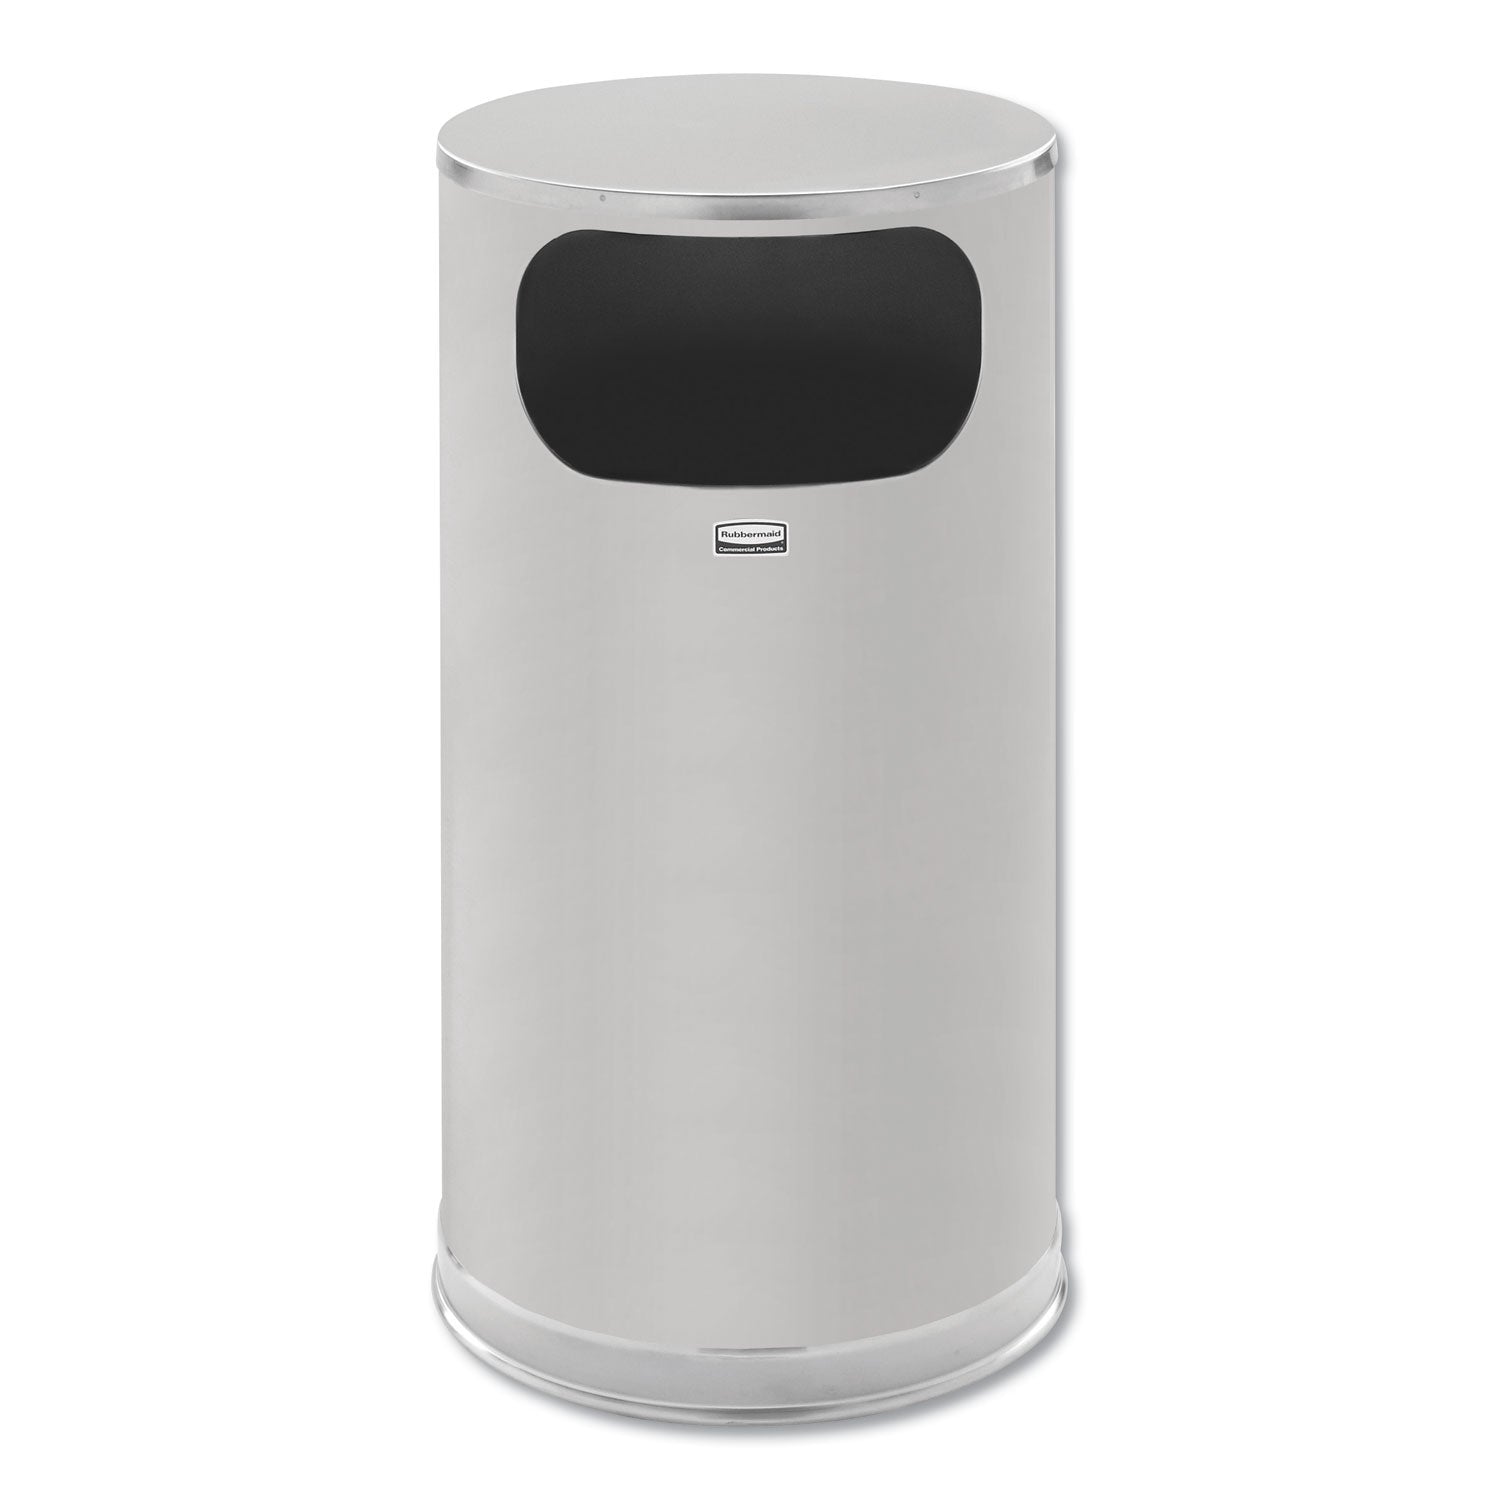 European and Metallic Series Waste Receptacle with Large Side Opening, 12 gal, Steel, Satin Stainless - 